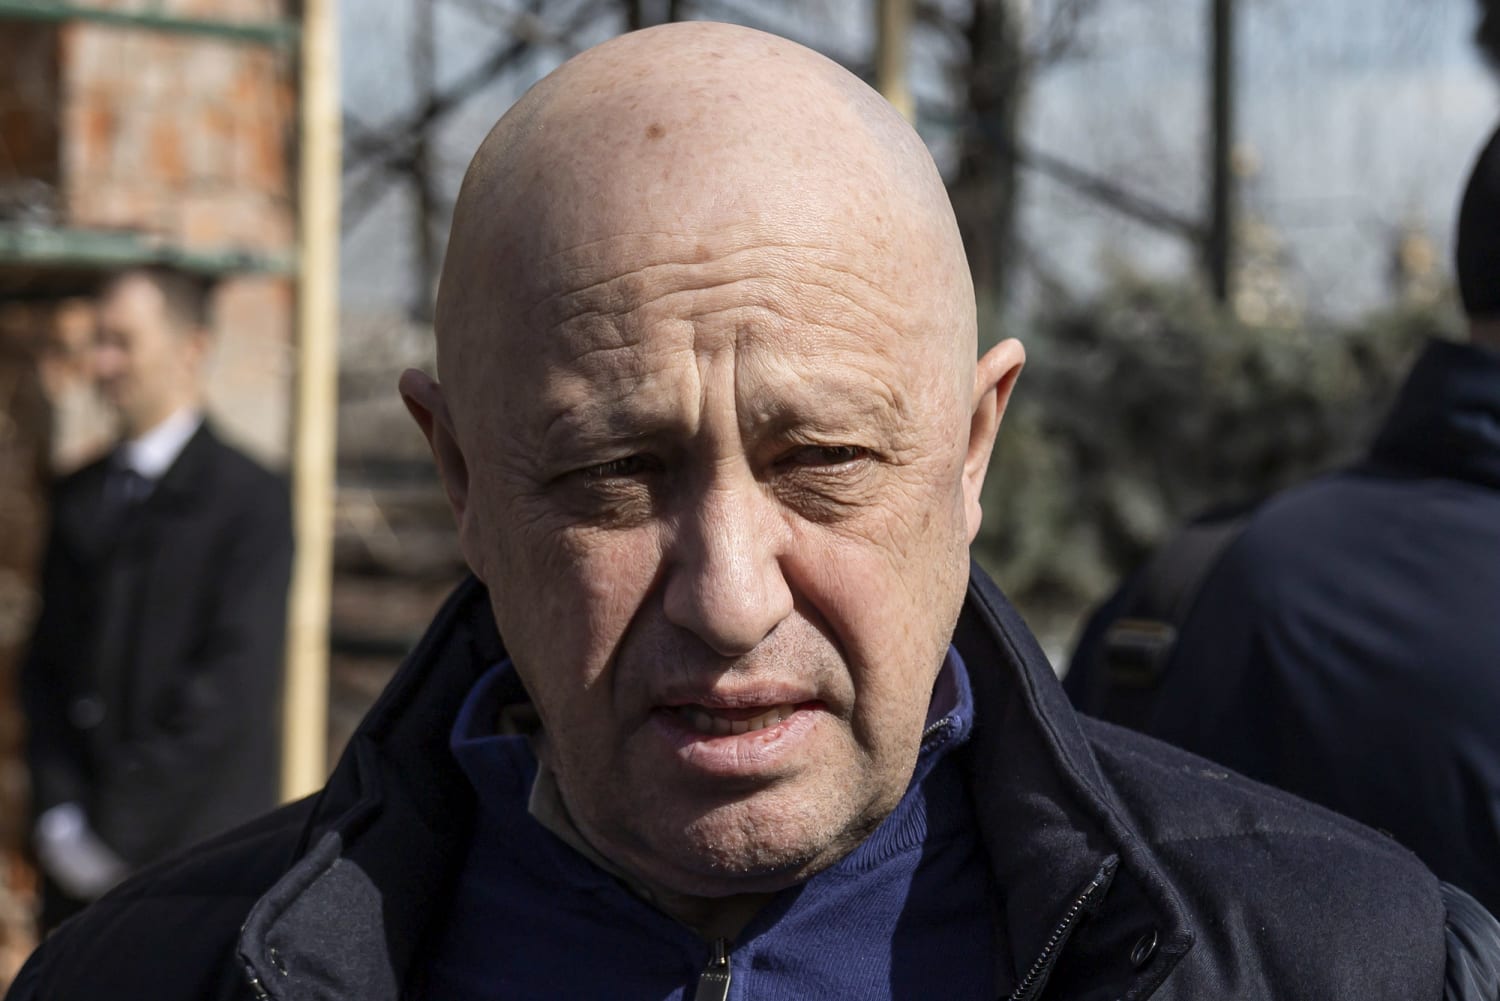 The inside man who shook the Kremlin: Who is Yevgeny Prigozhin, and what’s next for him?